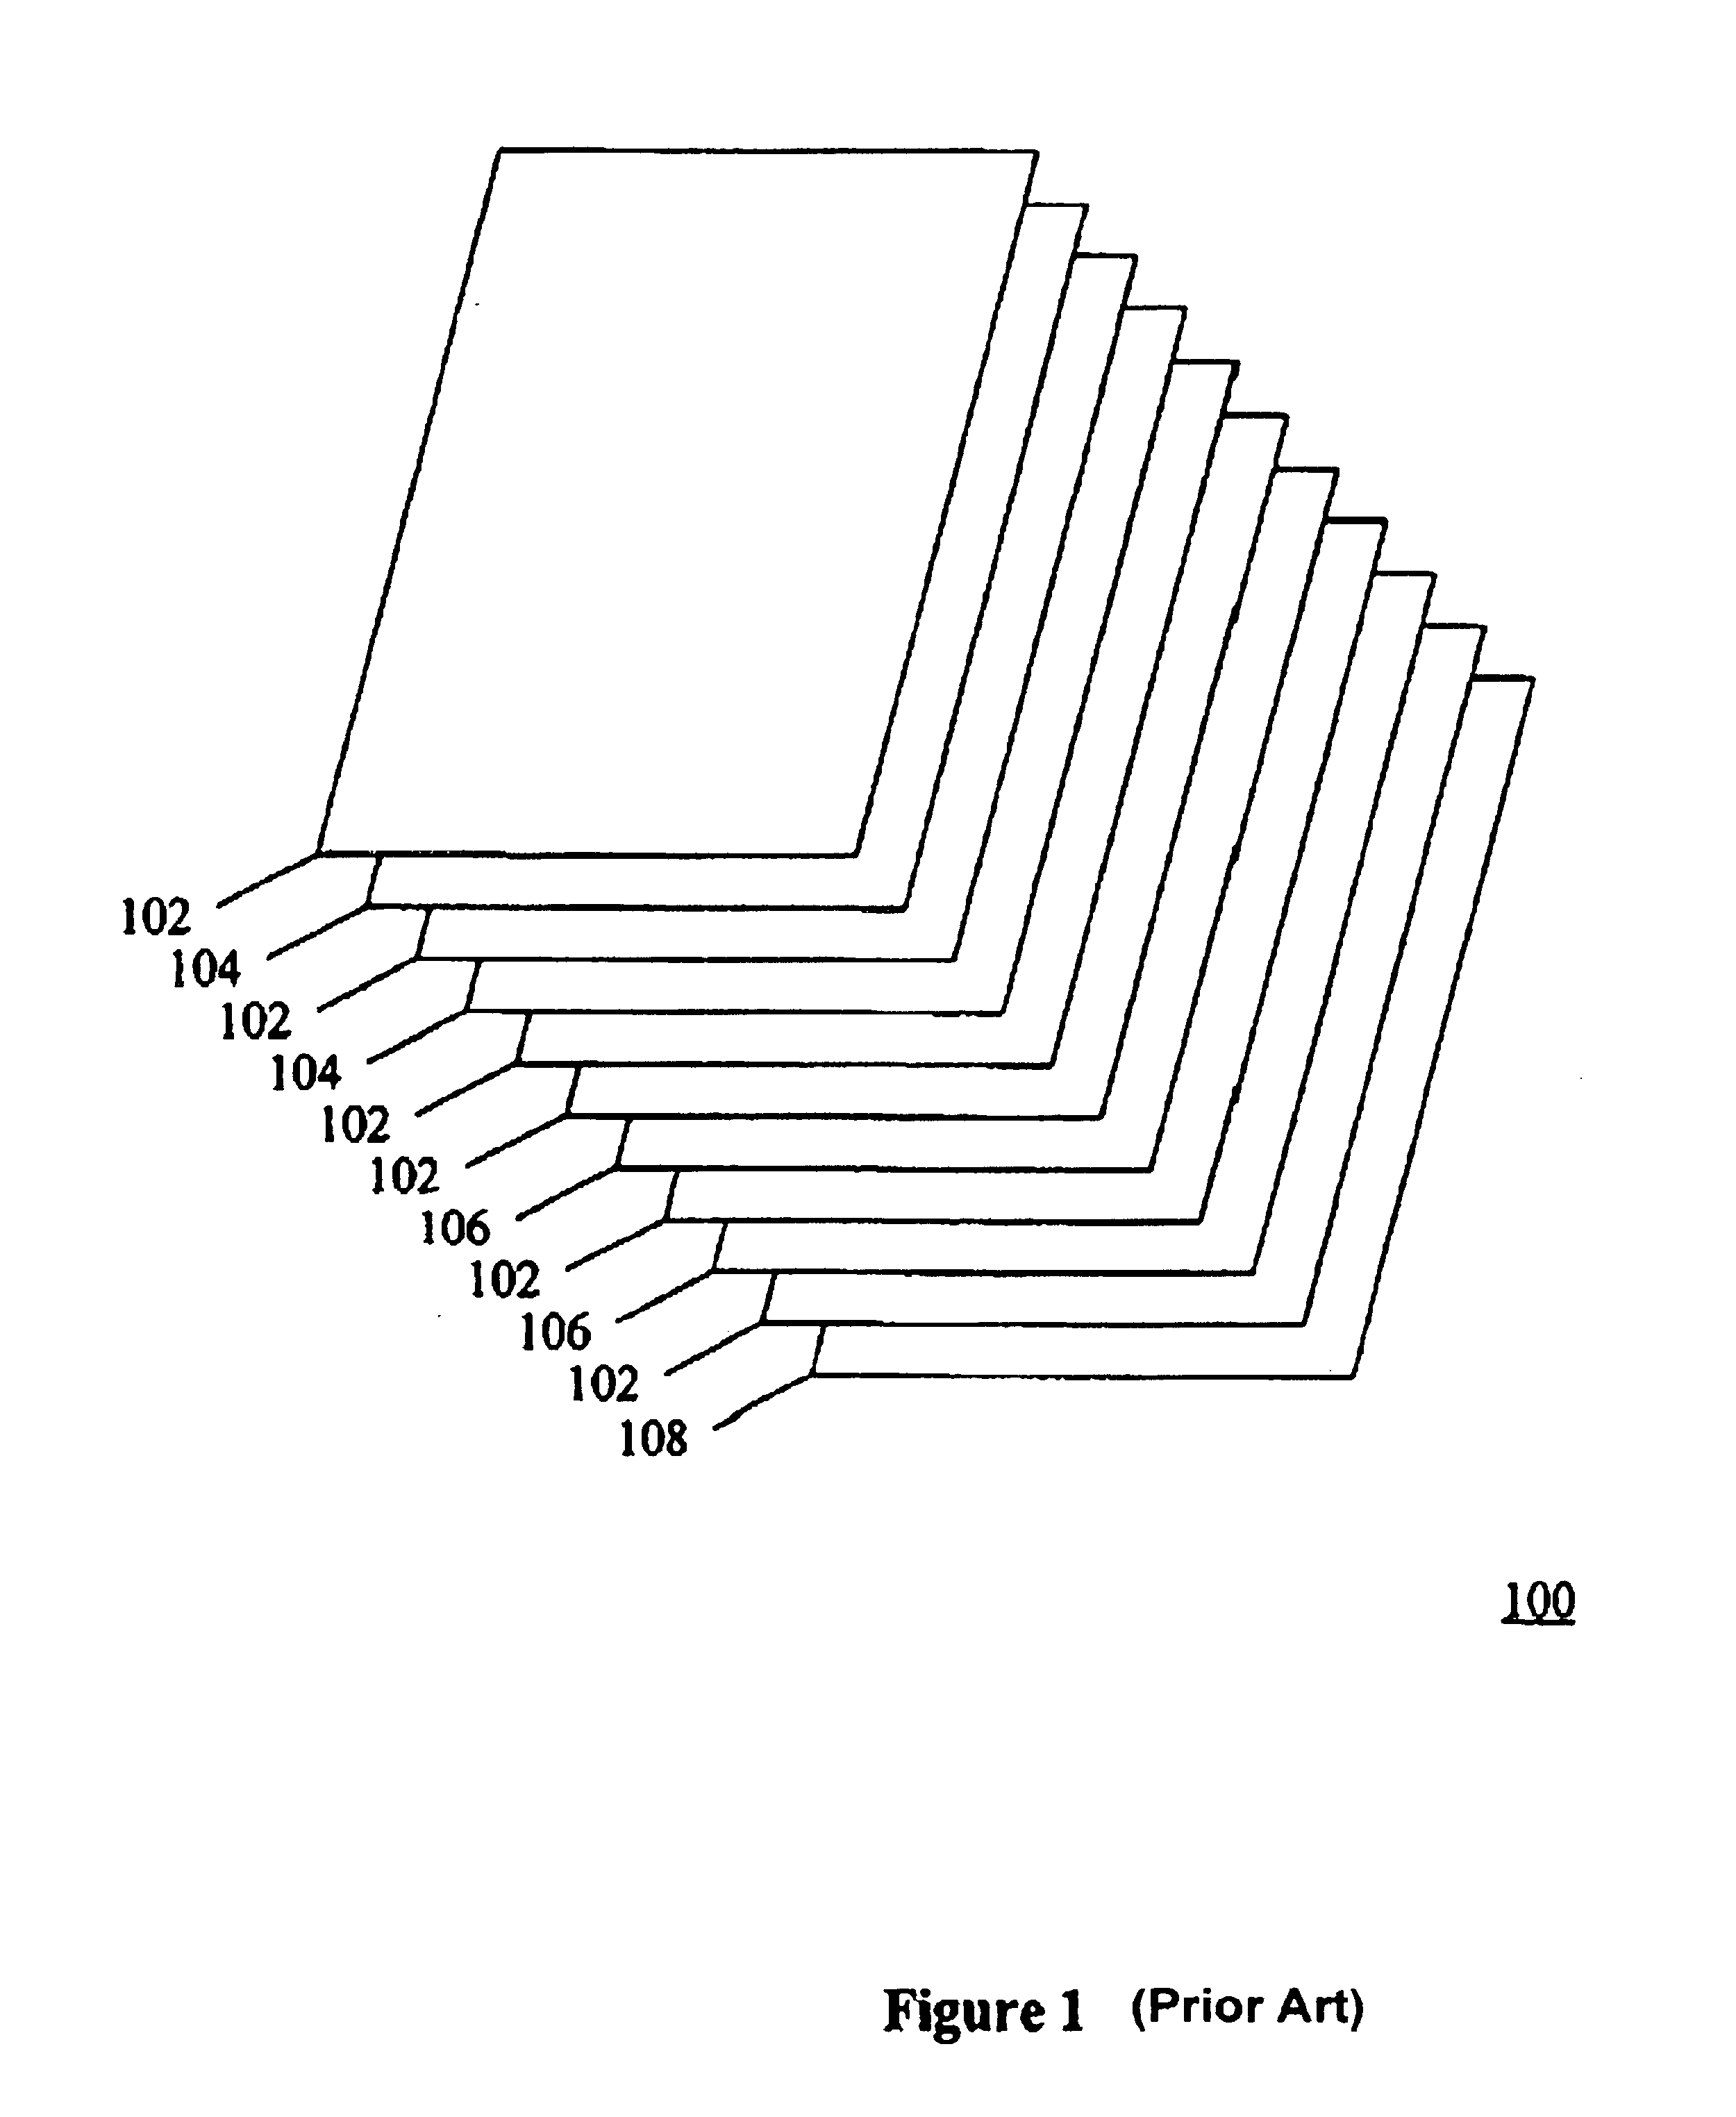 Method and apparatus to attenuate power plane noise on a printed circuit board using high ESR capacitors